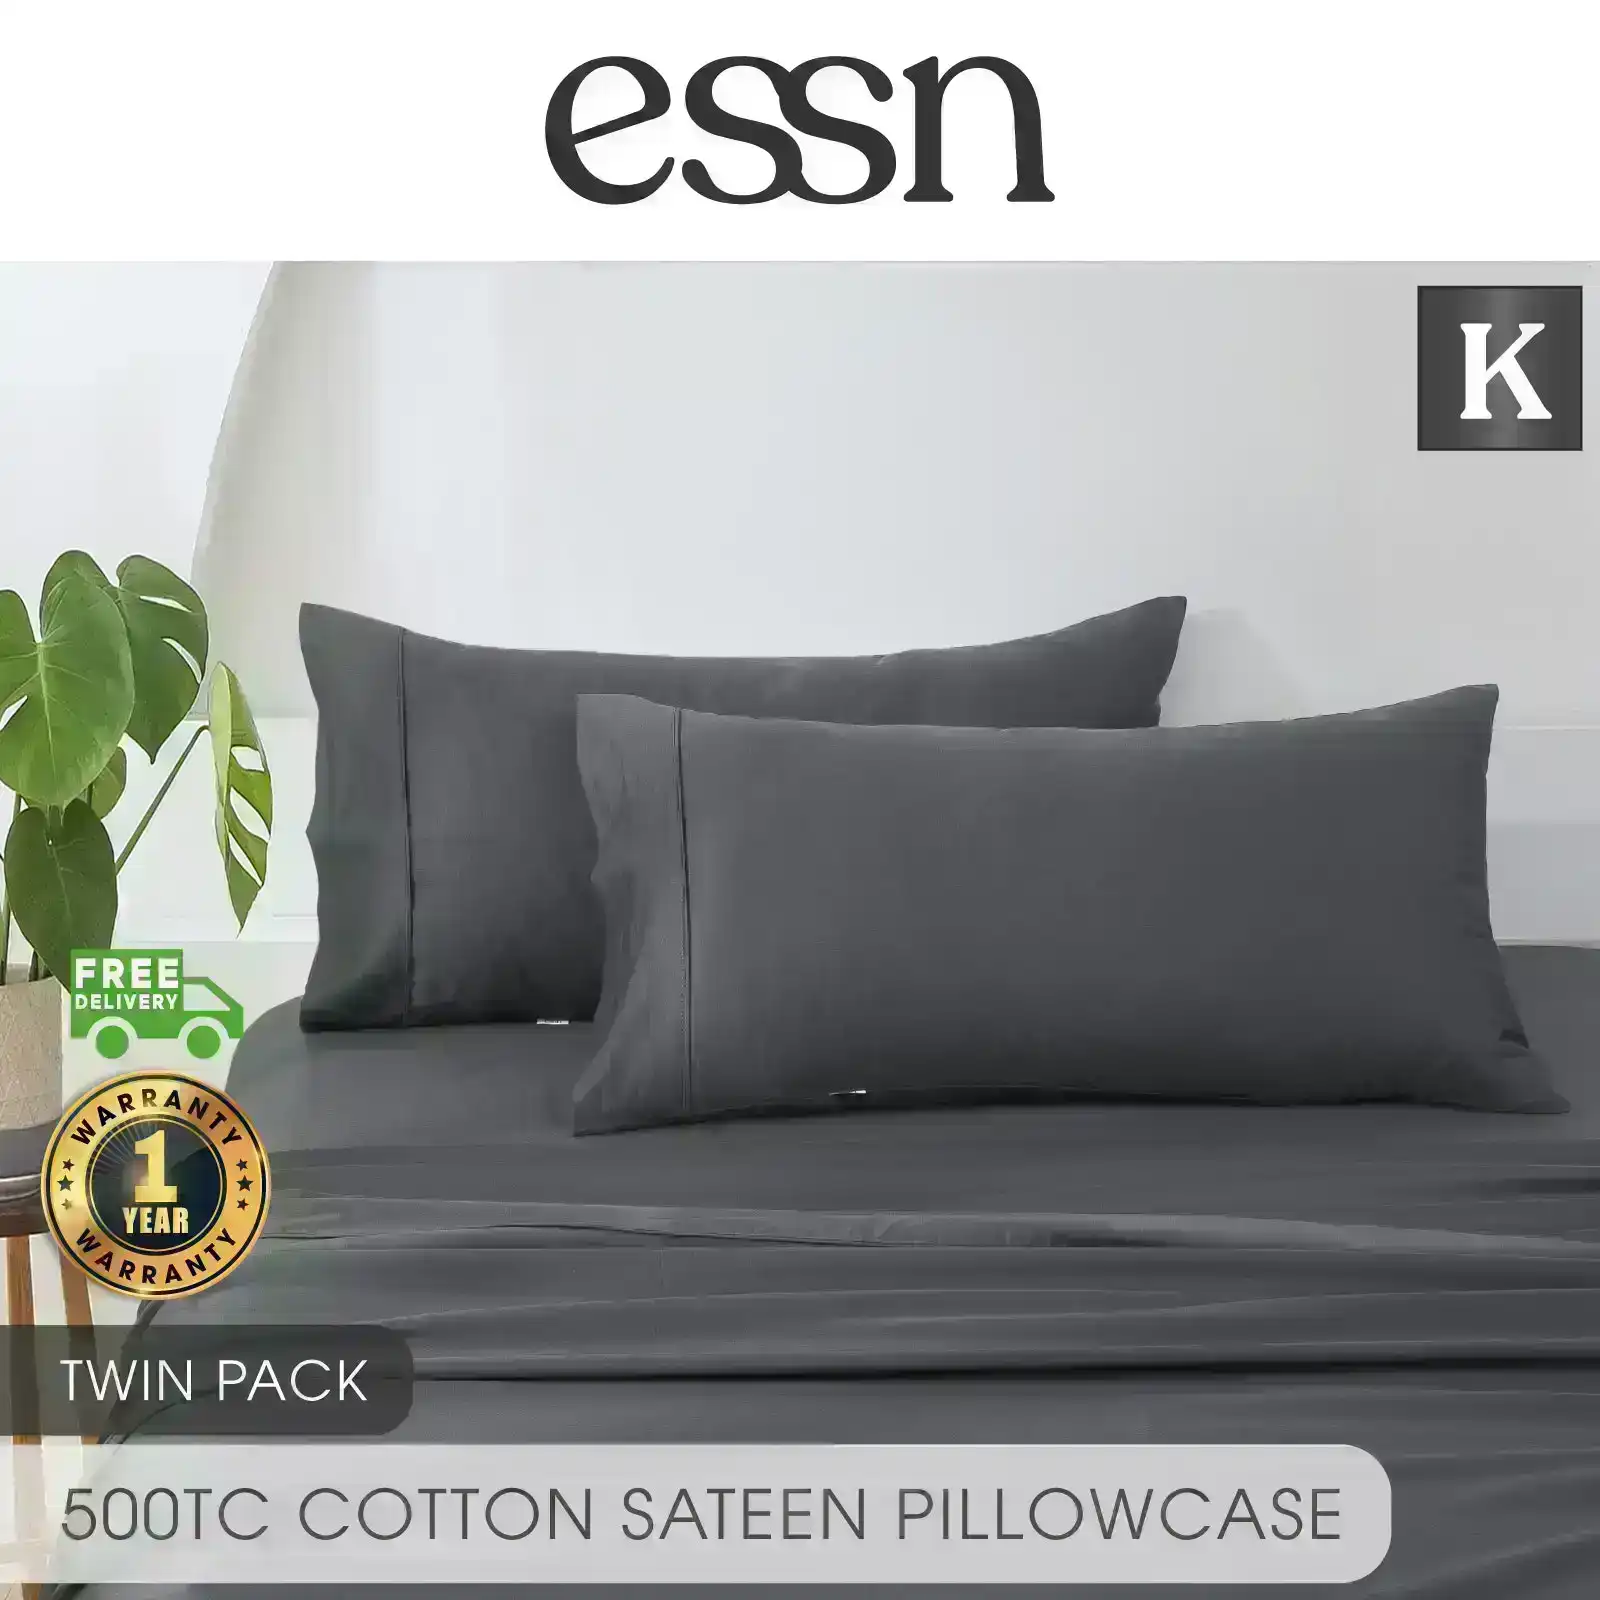 ESSN 500TC Cotton Sateen King Pillowcases Charcoal (Twin Pack)